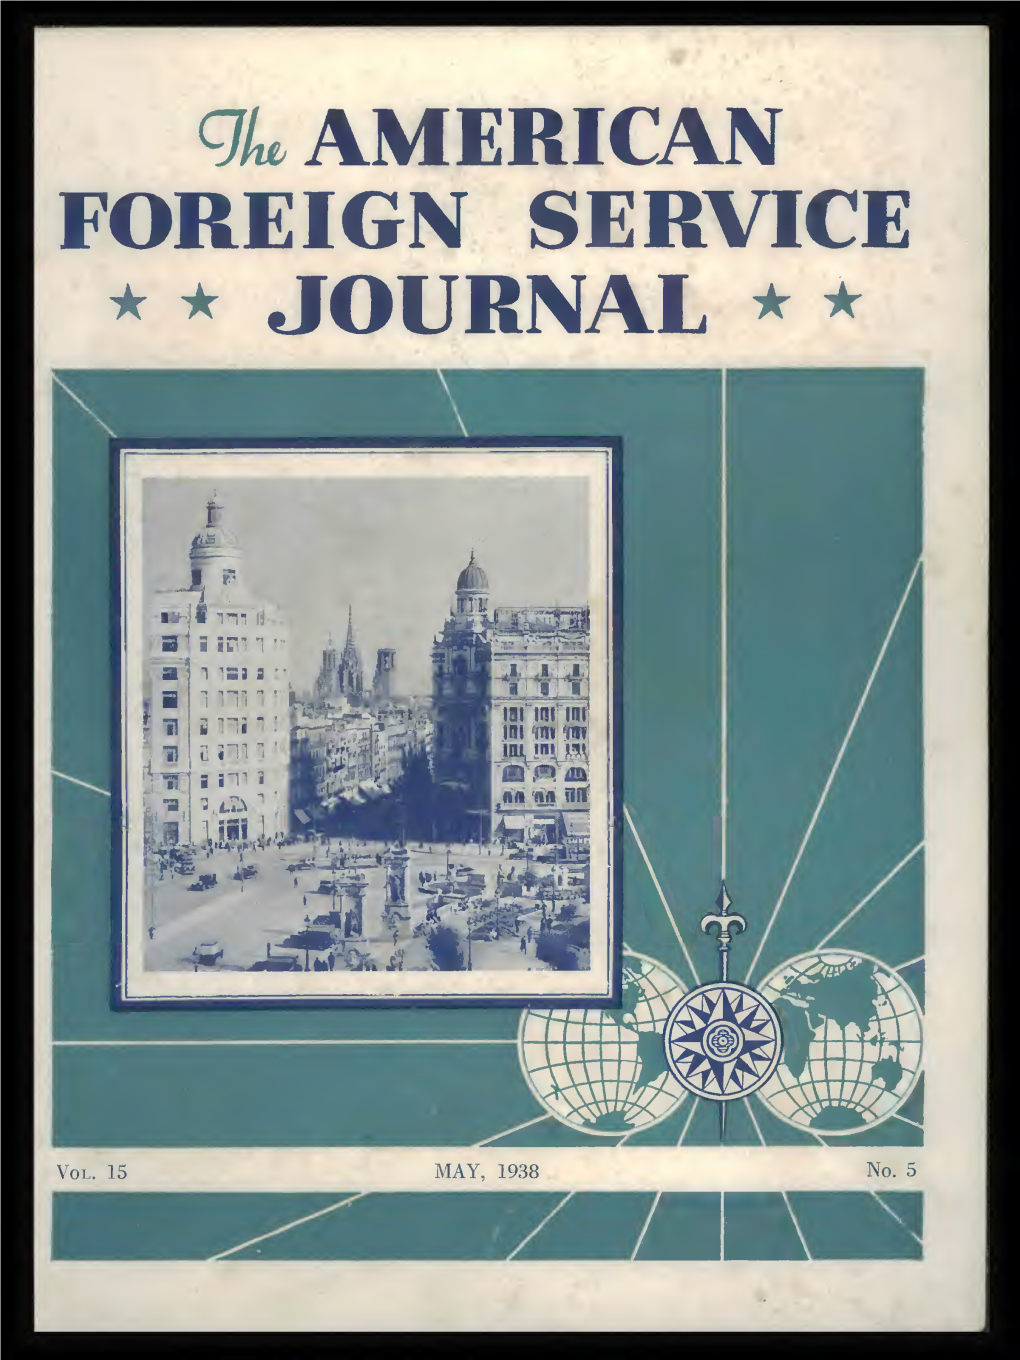 The Foreign Service Journal, May 1938